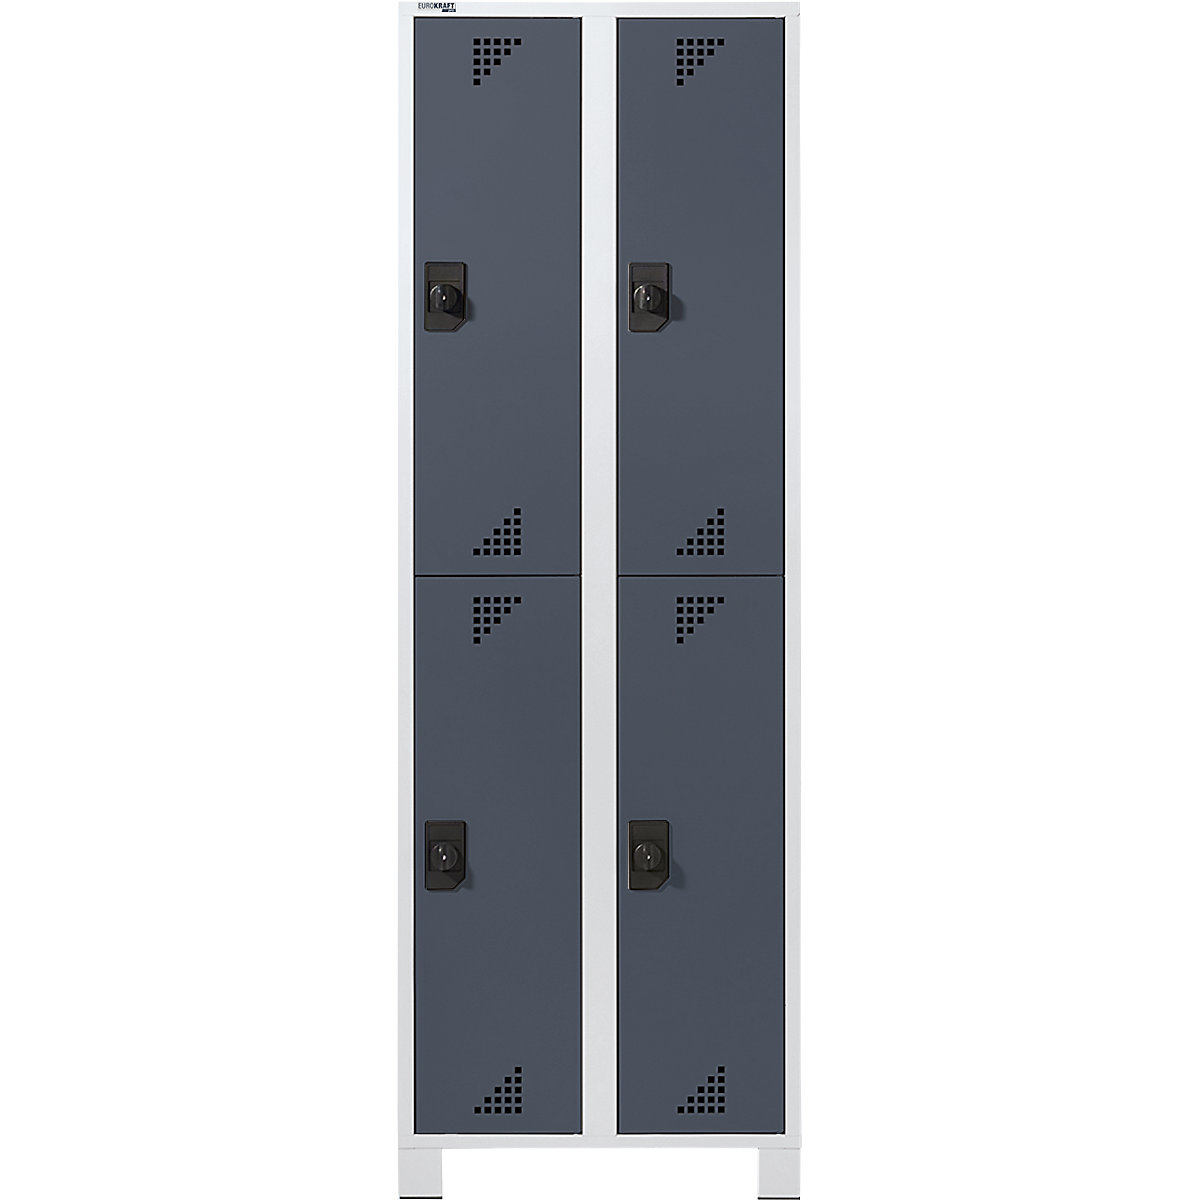 Cloakroom locker with half-height compartments – eurokraft pro, HxWxD 1800 x 600 x 500 mm, 4 compartments, light grey body, charcoal doors-5